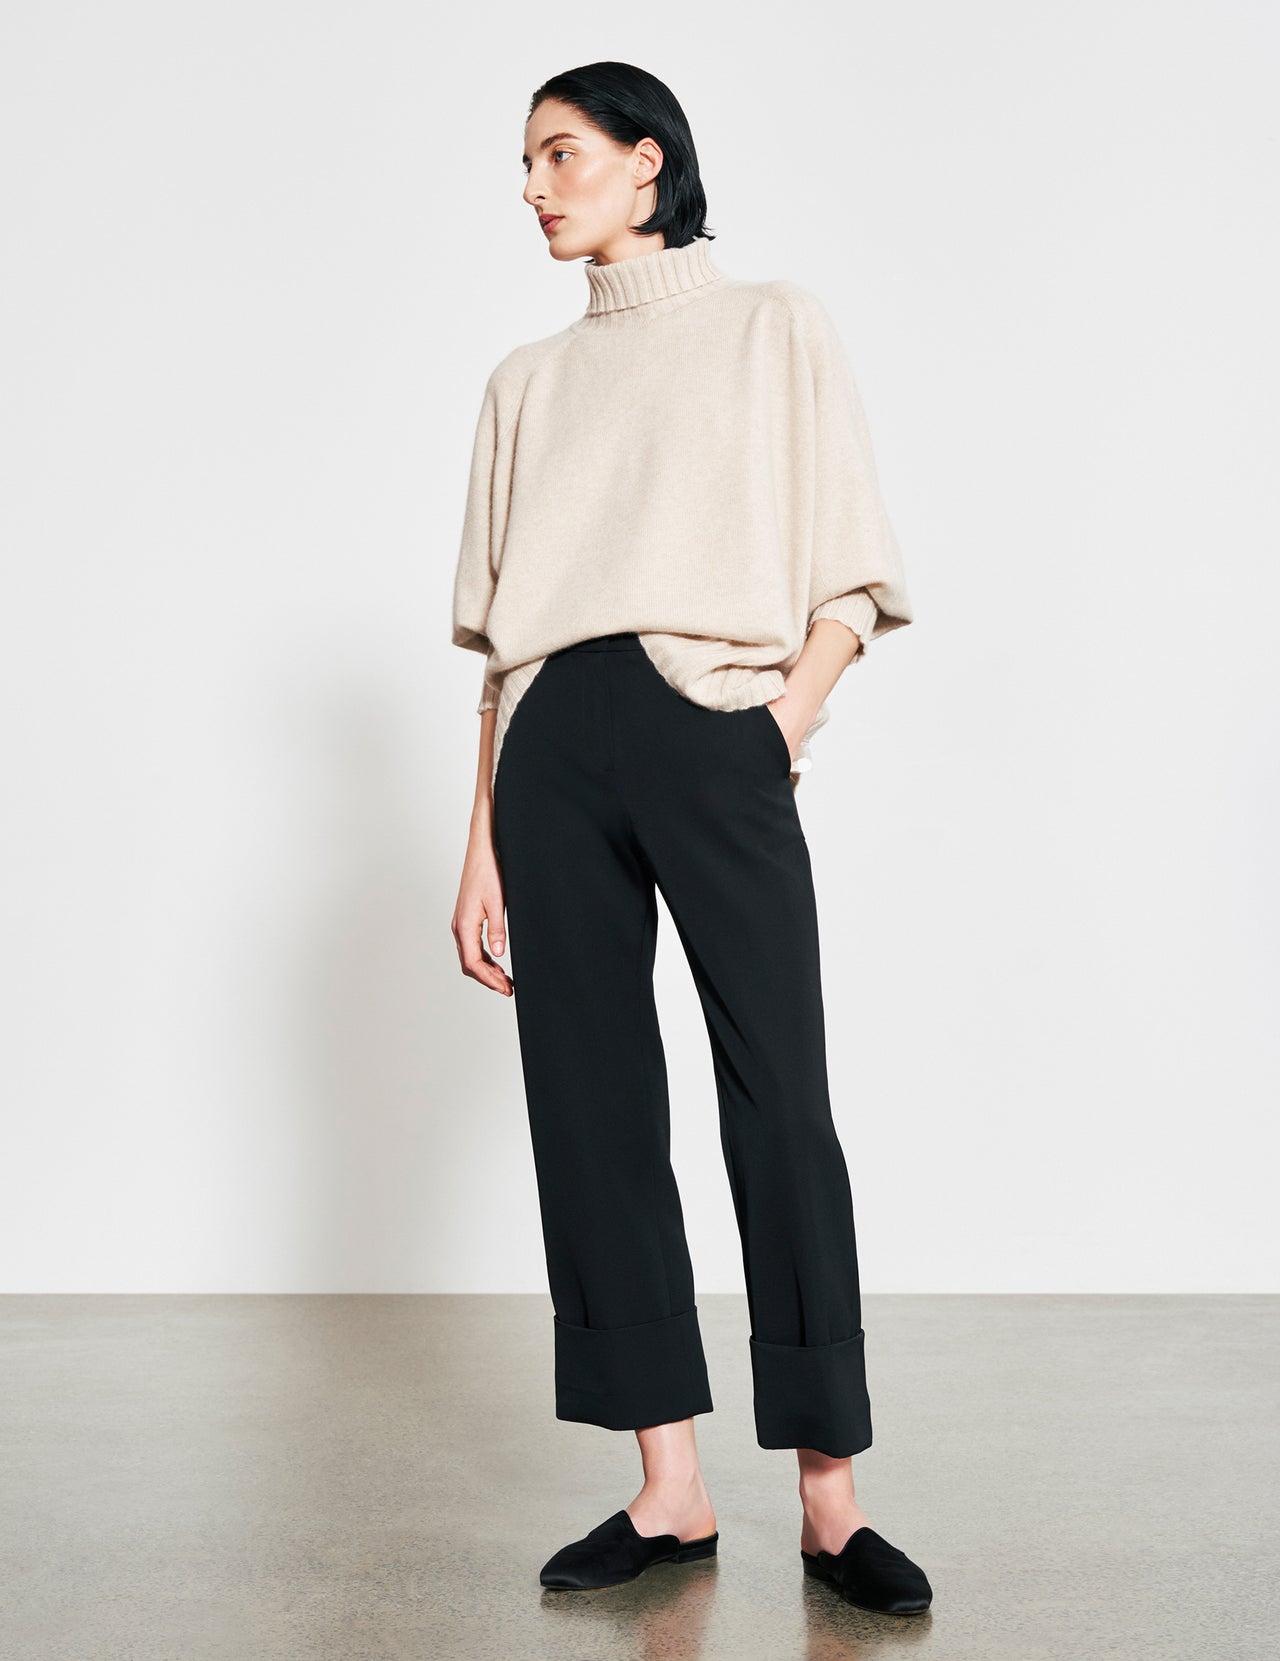  Wheat Roll Neck Cashmere Sweater  